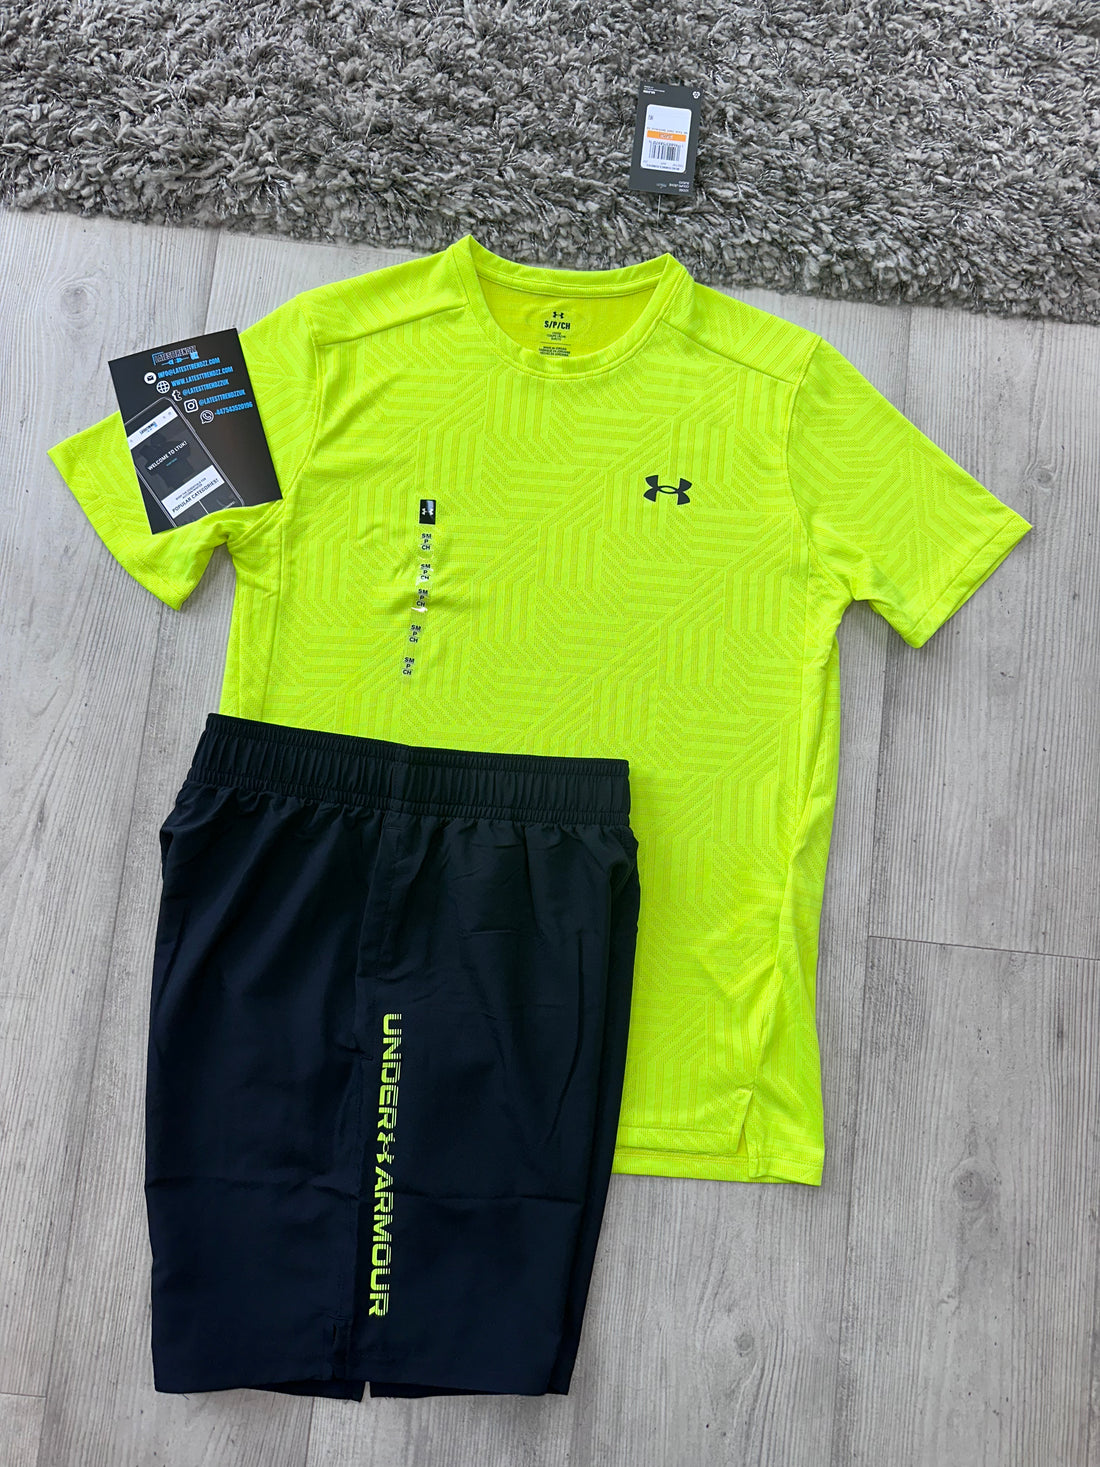  Under Armour UA Tech Short Sleeve Tee High-Vis Yellow/Black LG  Tall : Clothing, Shoes & Jewelry